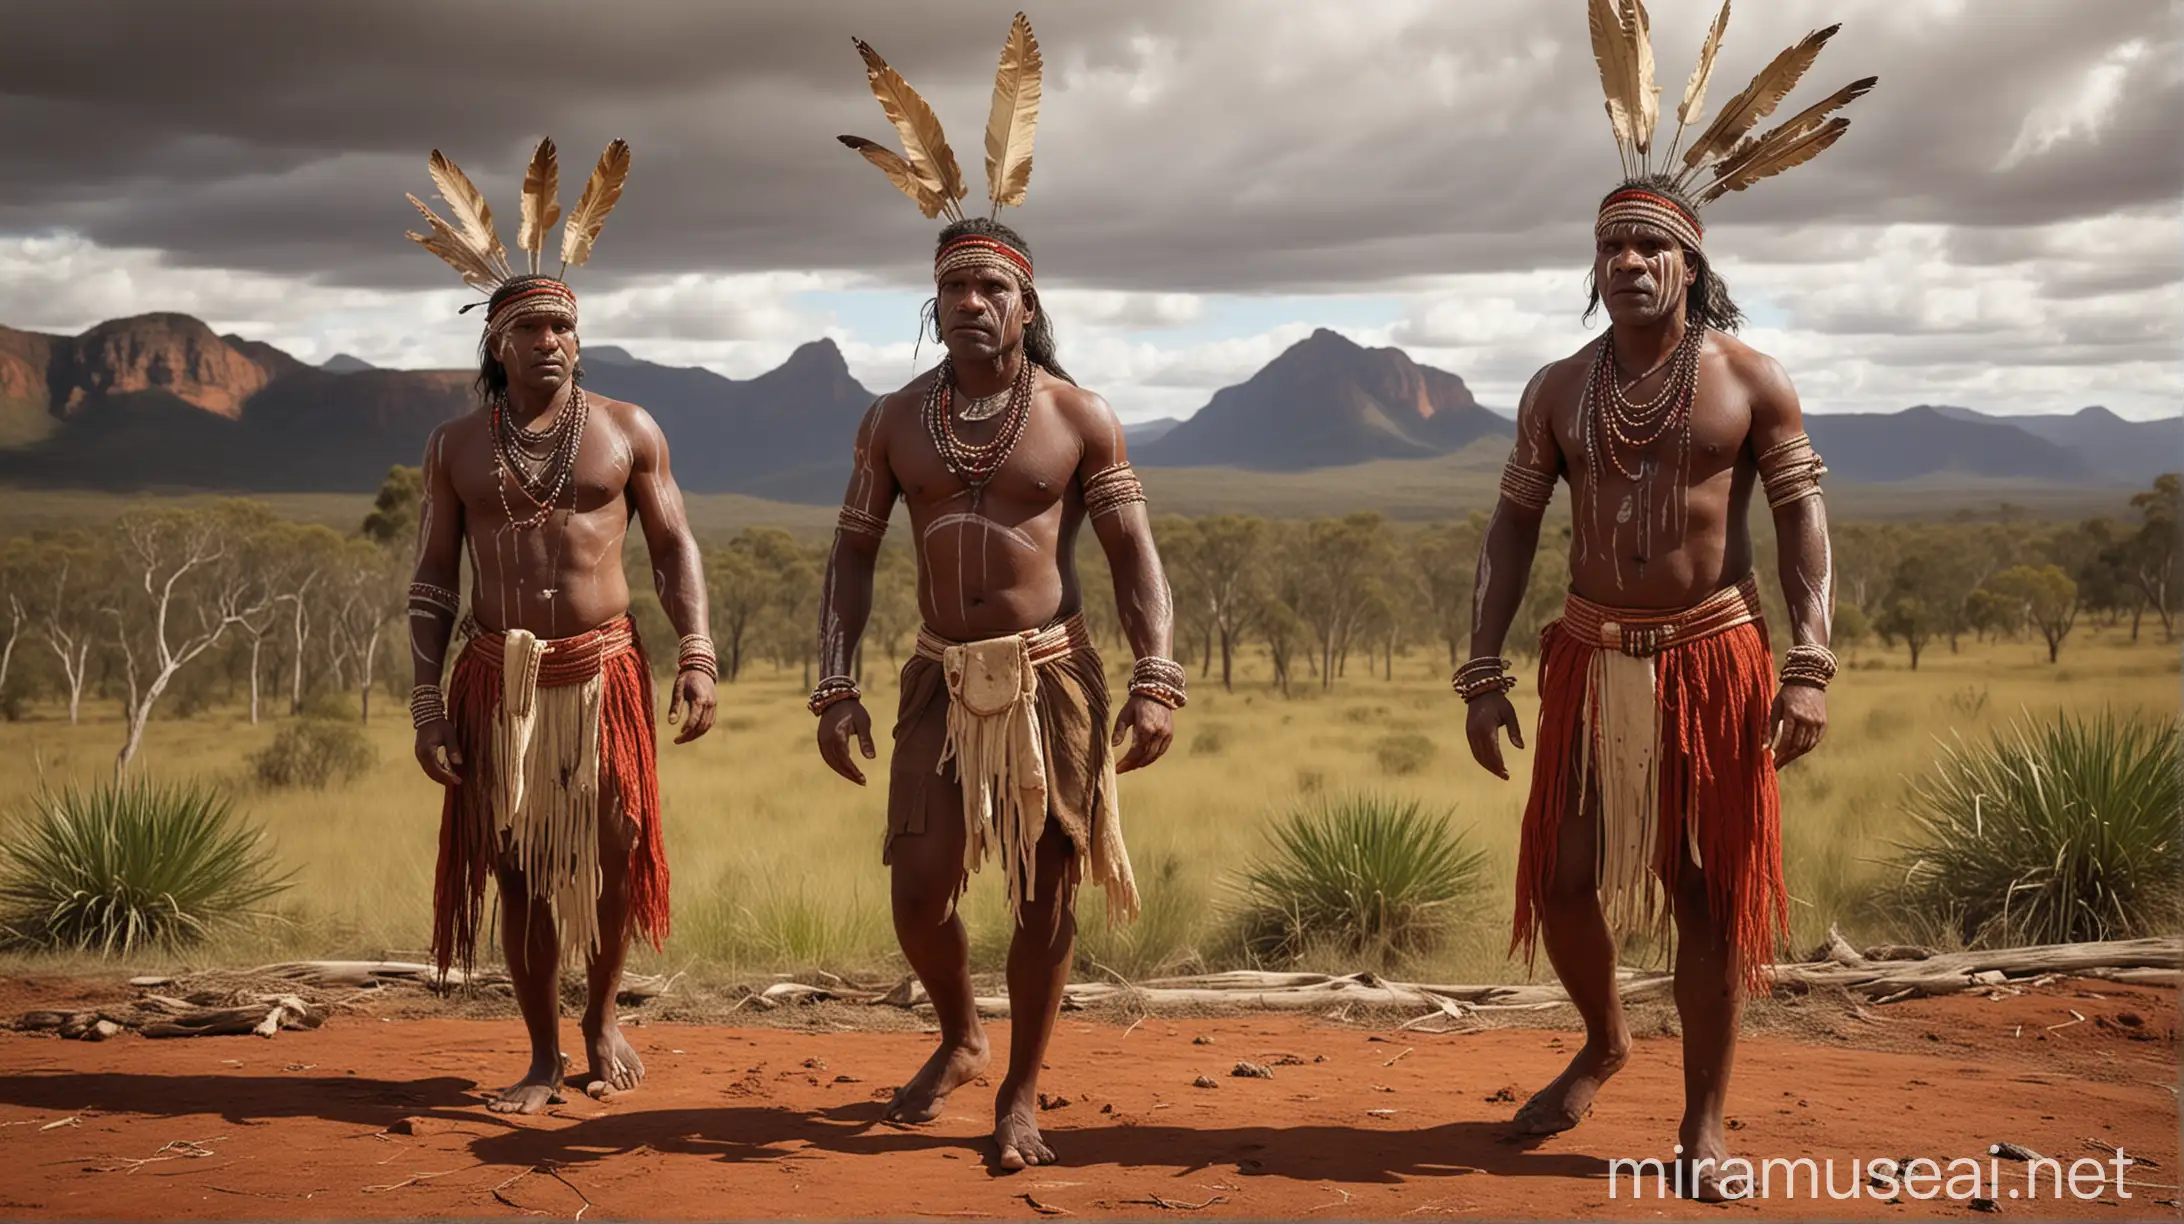 Vibrant Australian Aboriginal Ceremony with Traditional Dances and Cultural Artifacts